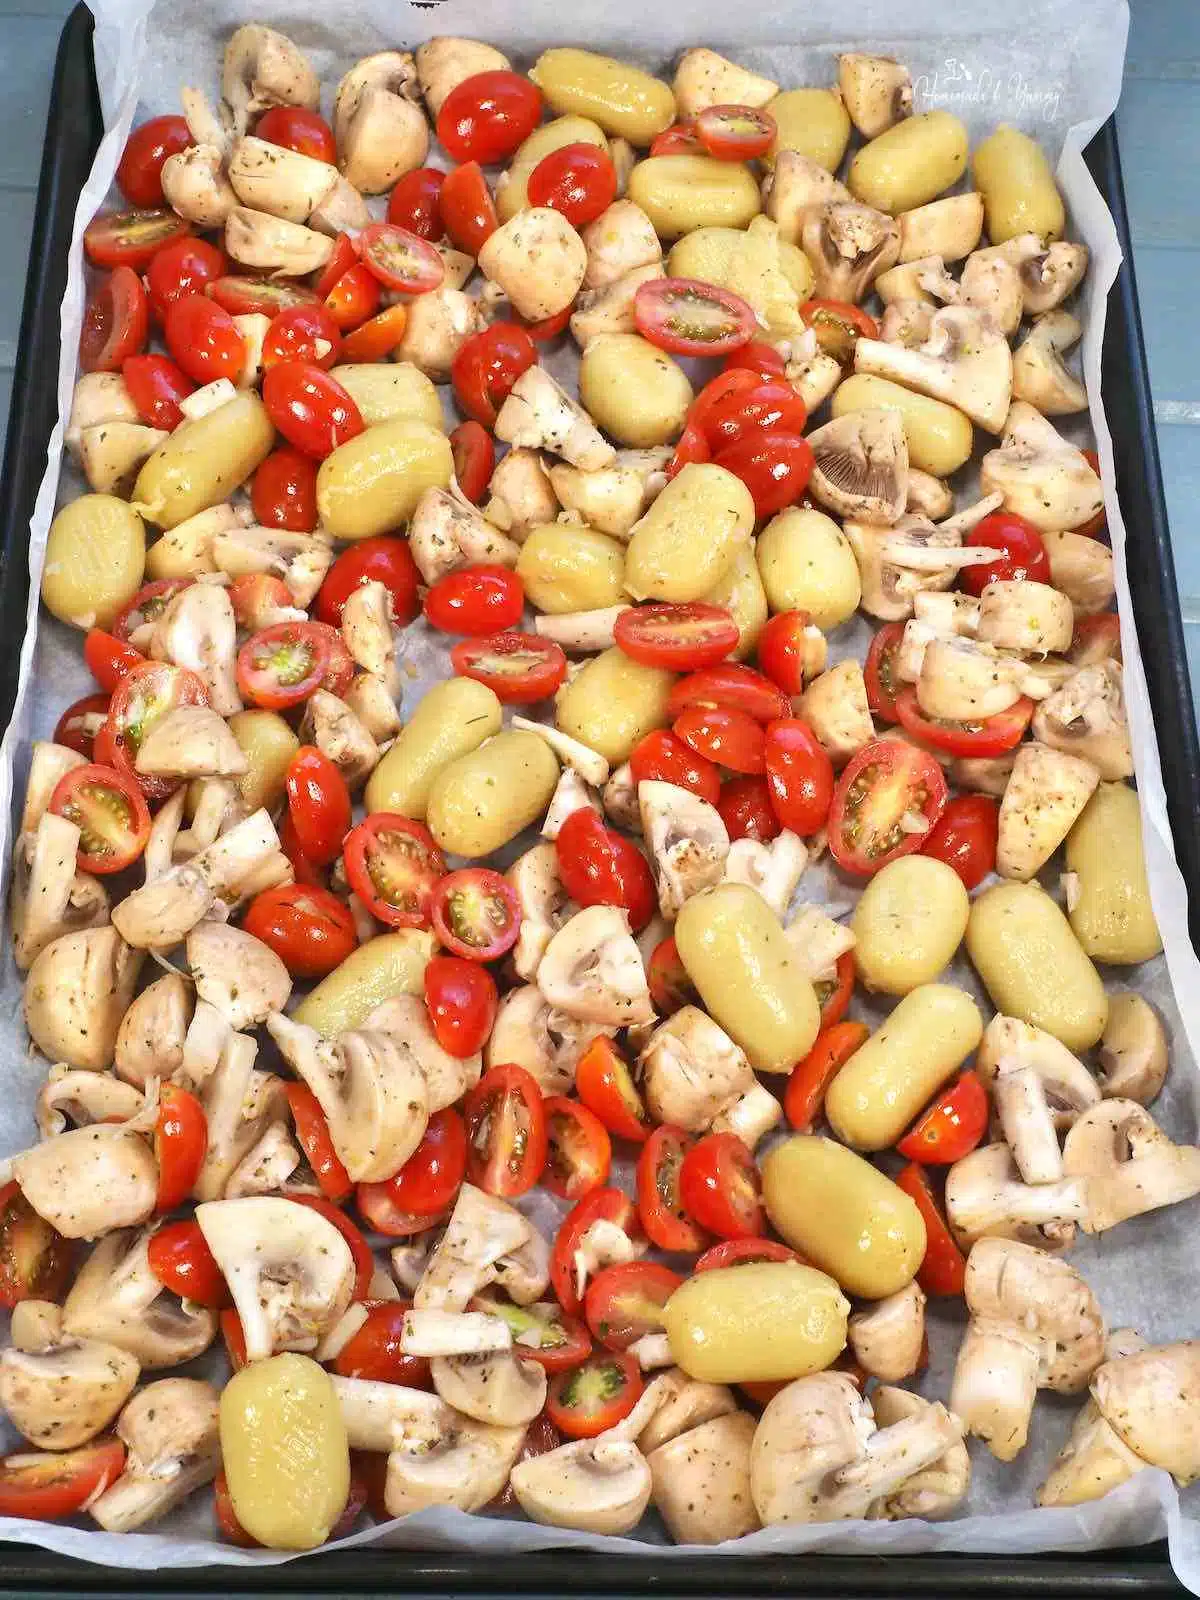 Gnocchi, mushrooms and tomatoes on a sheet pan ready for the oven.